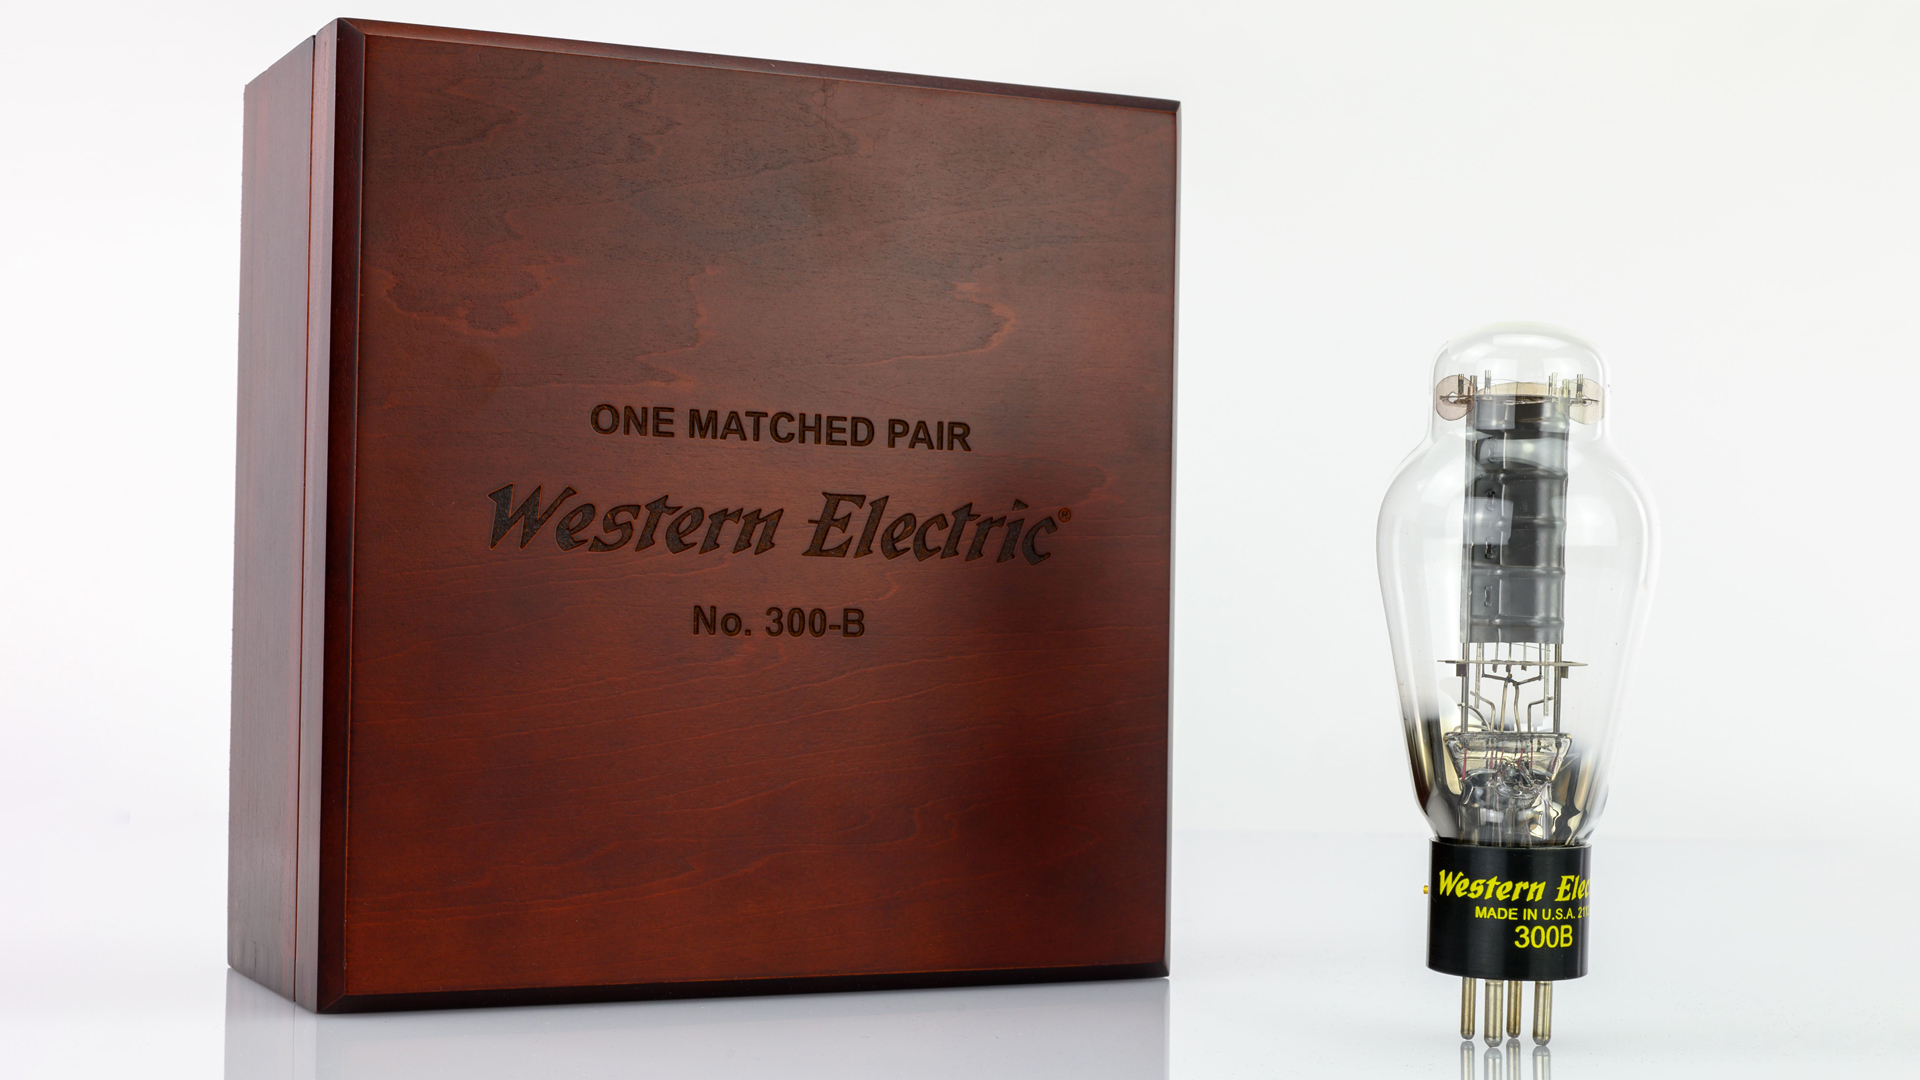 The new 300B Vacuum Tube with its Wooden Chest (Image Credit: GKS-Vertriebs GmbH)